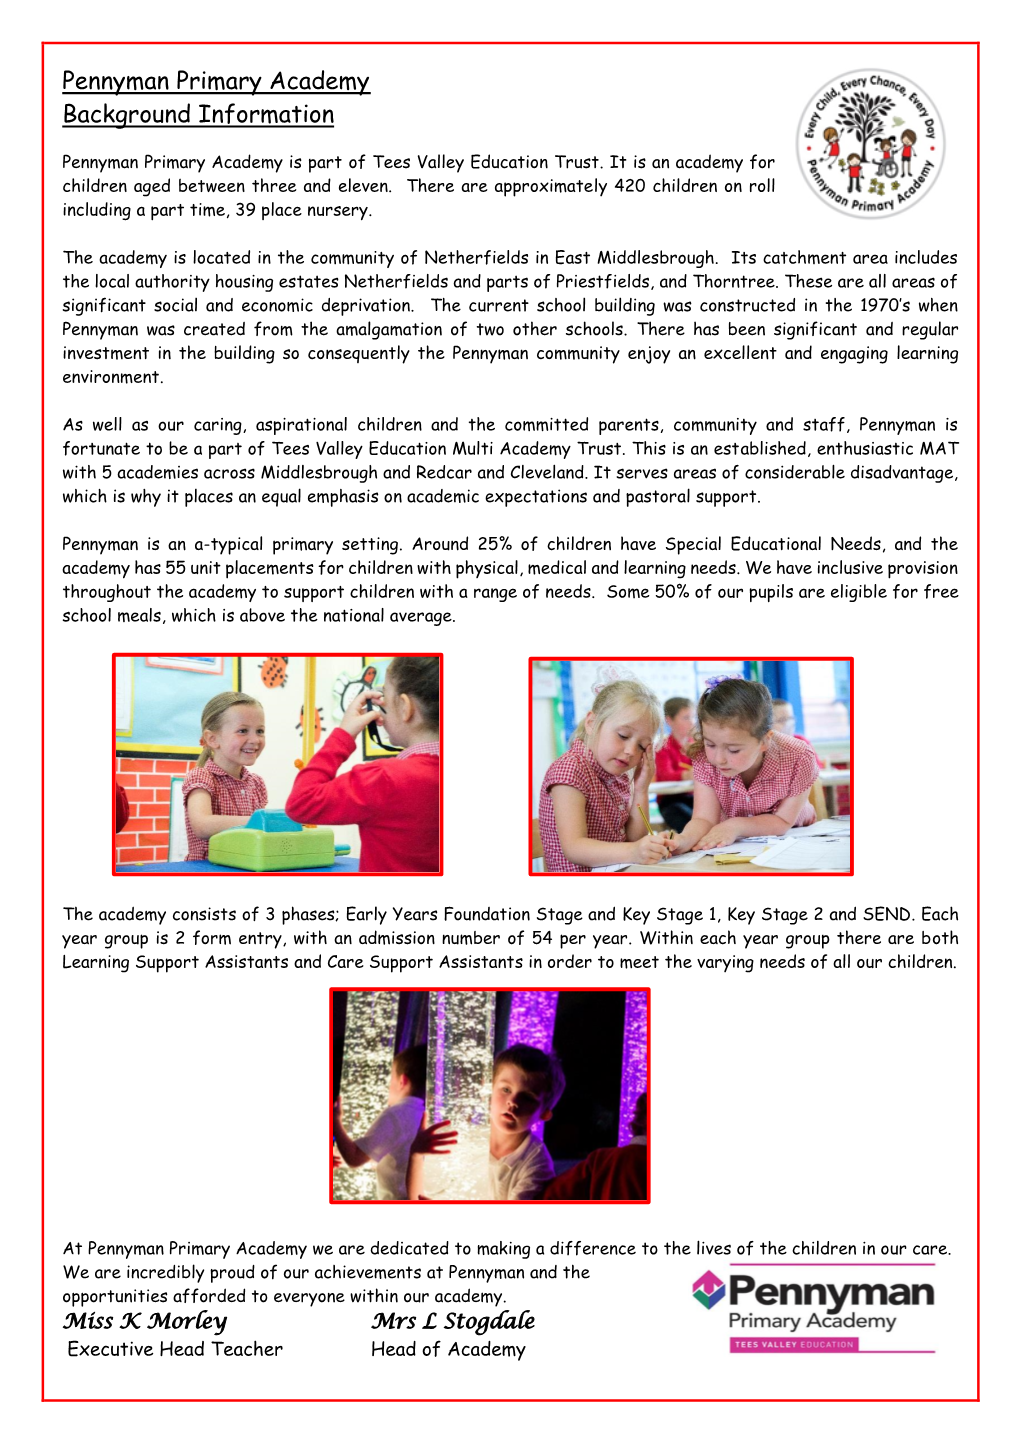 Pennyman Primary Academy Background Information